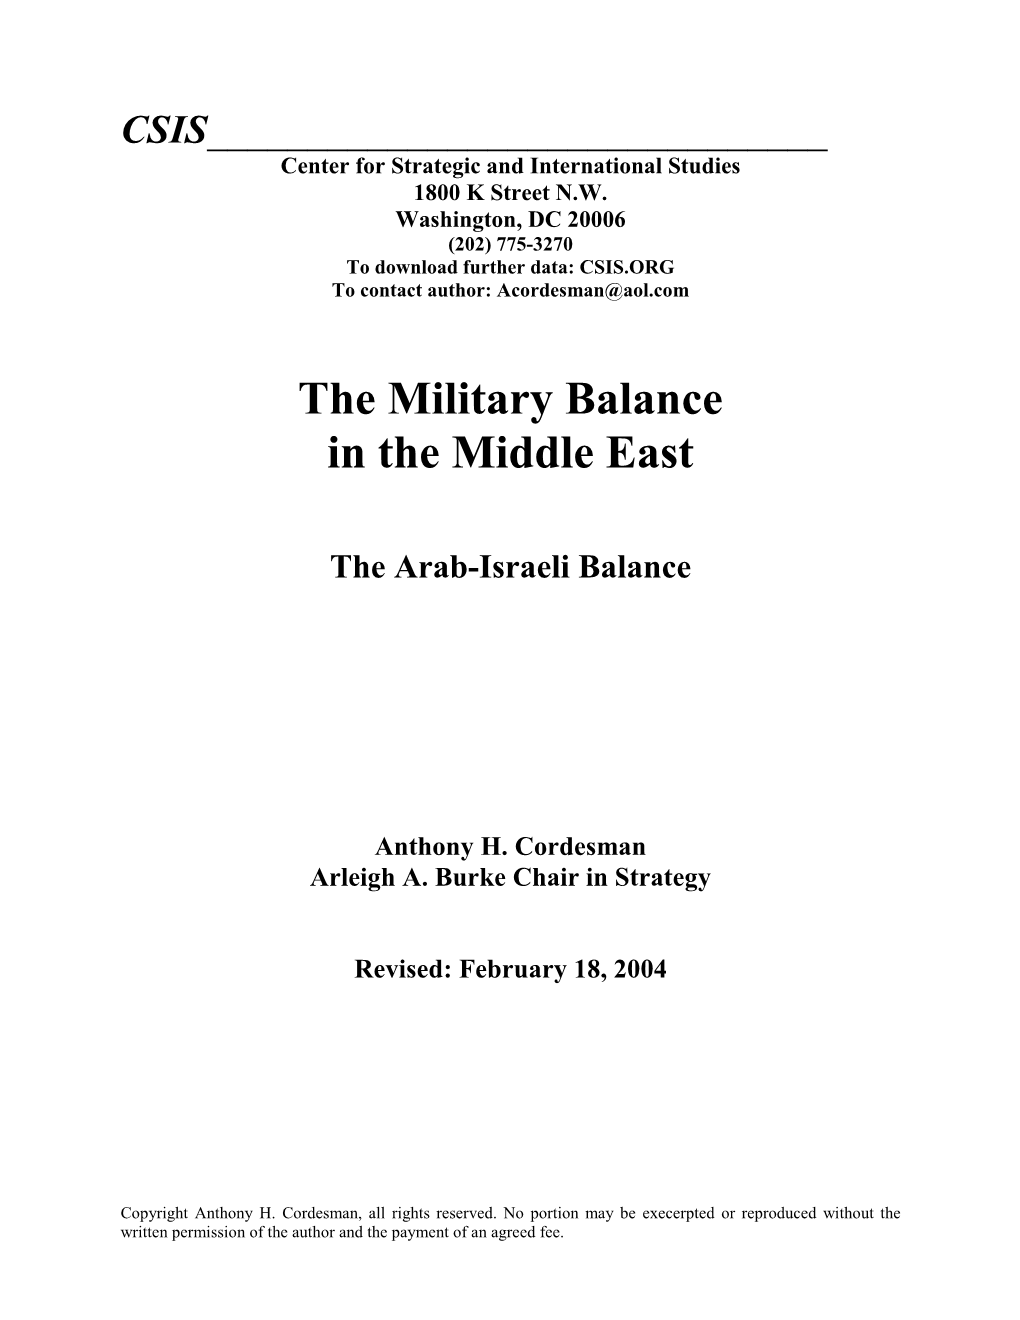 The Military Balance in the Middle East – Arab-Israeli Balance I 2/23/2004 Ii Page